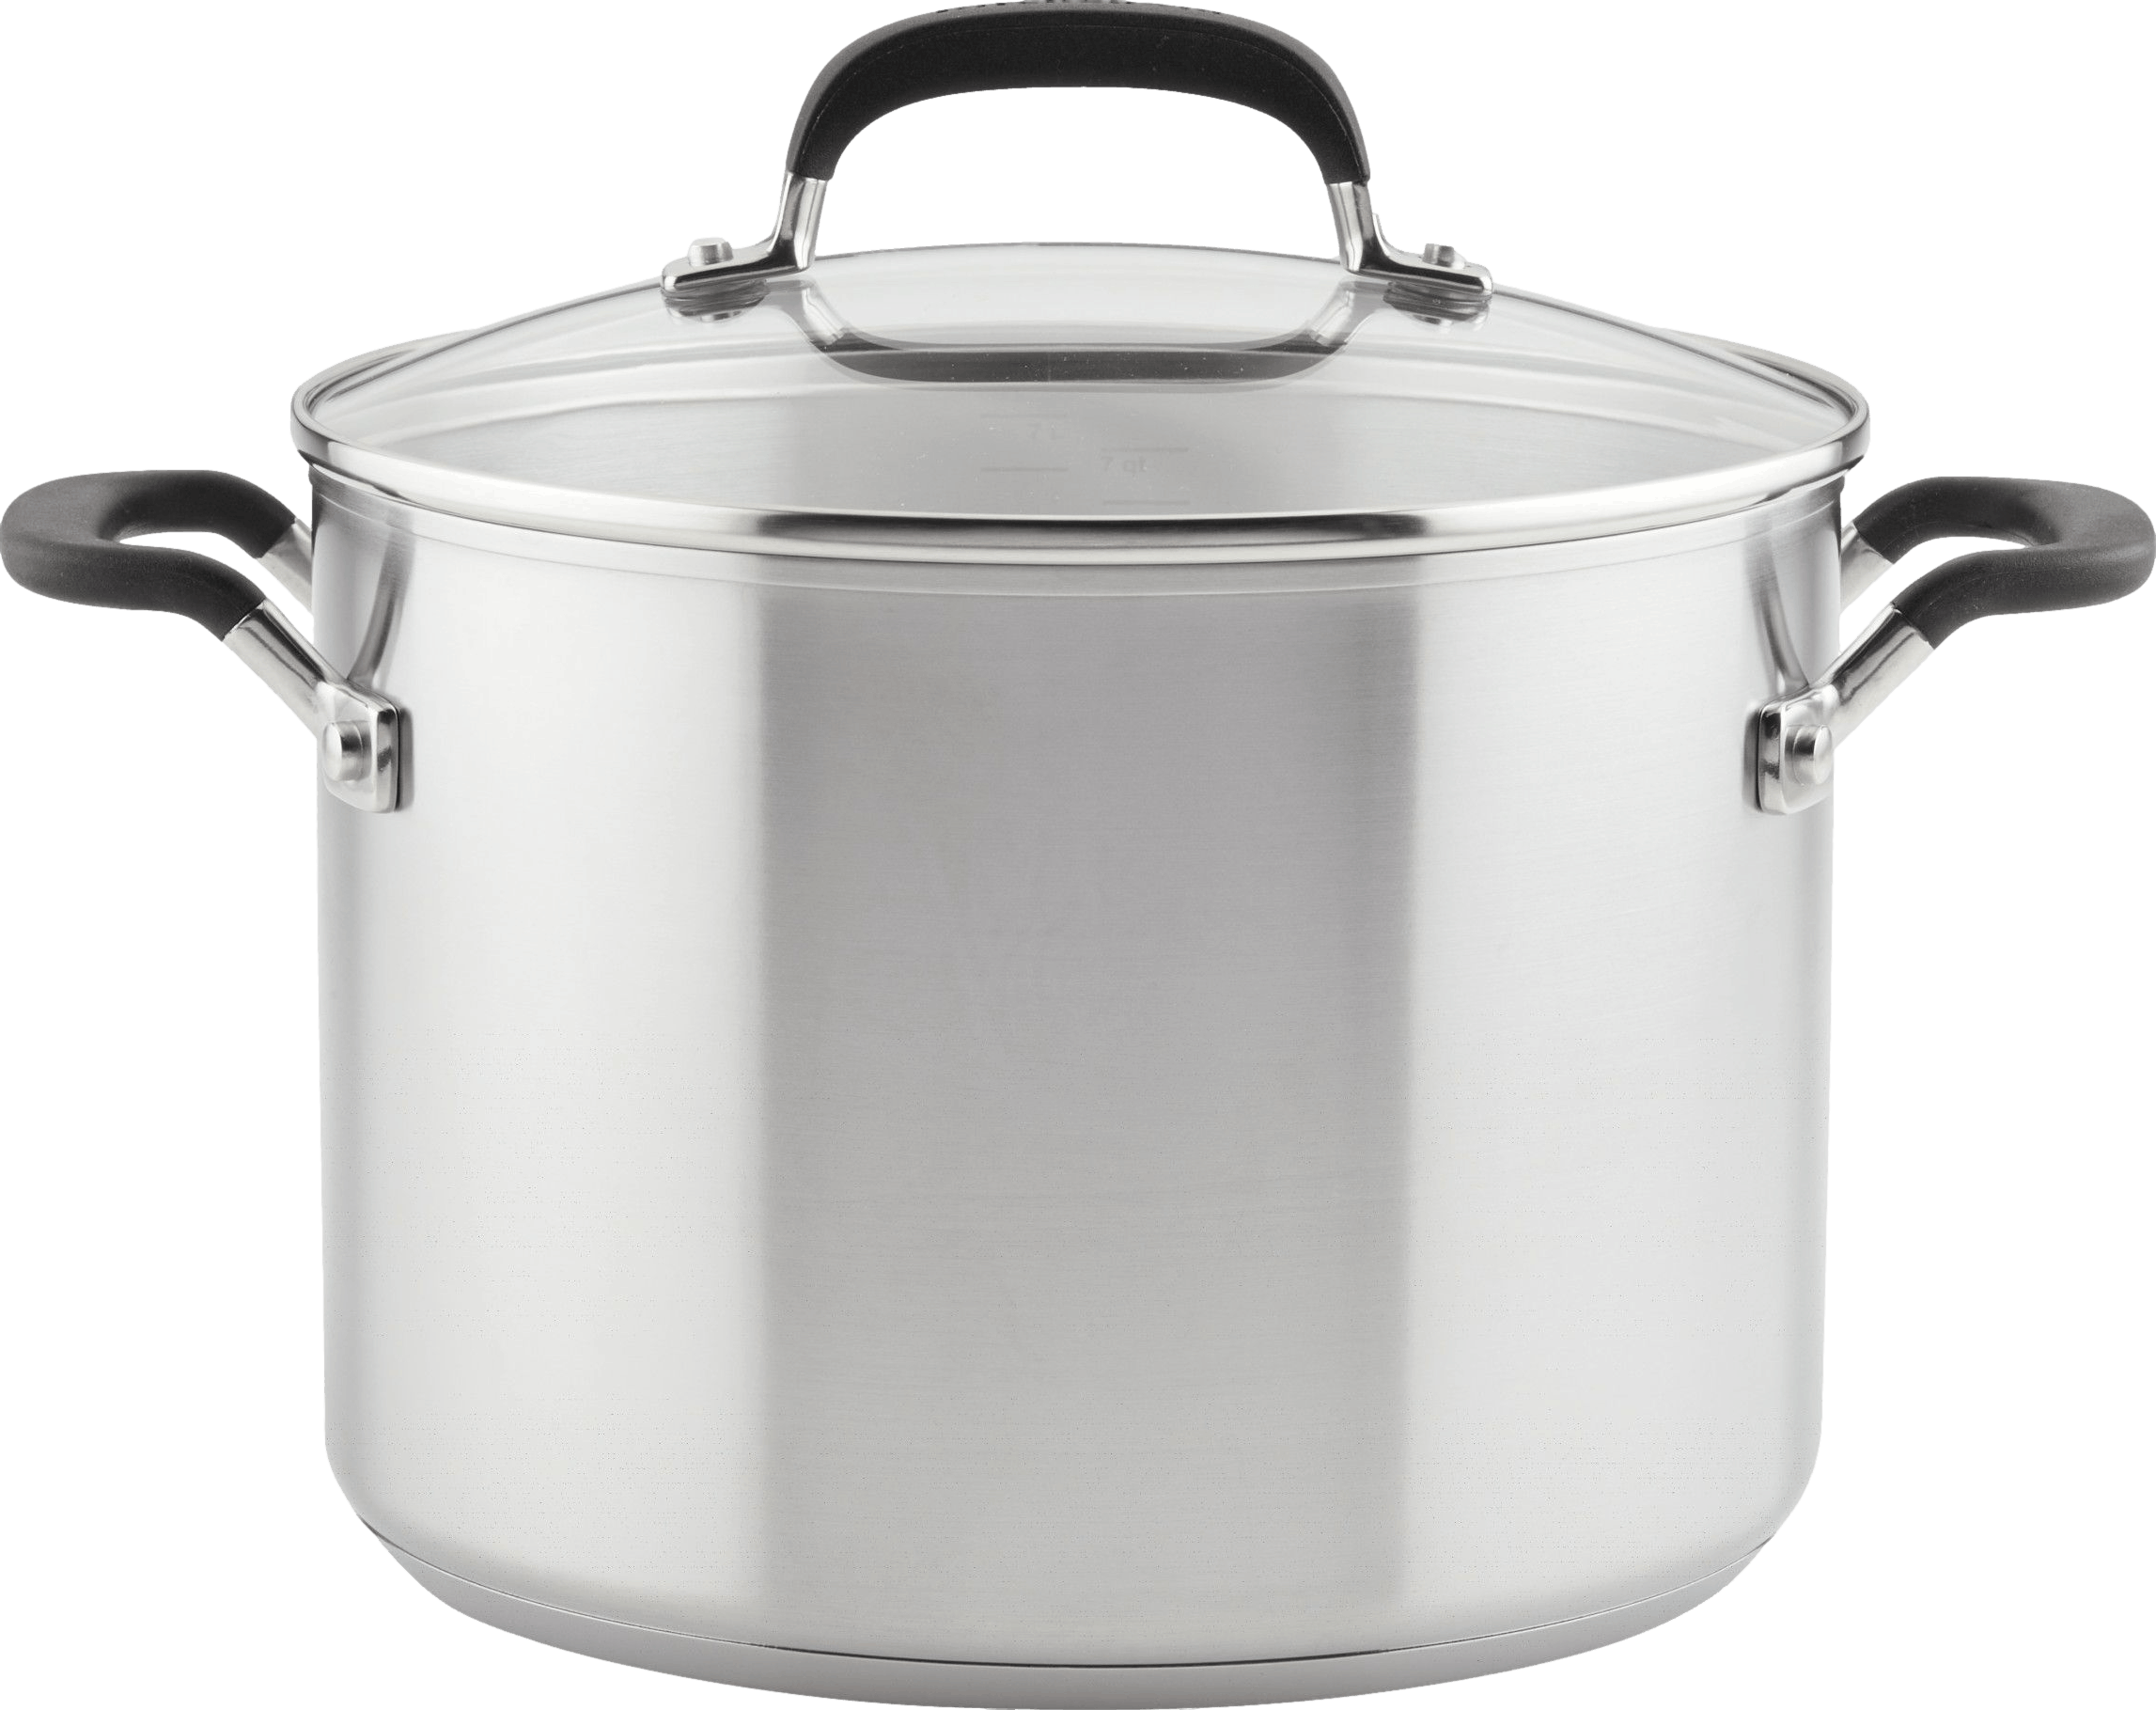 KitchenAid Stainless Steel Induction Stockpot with Measuring Marks and Lid, 8-Quart, Brushed Stainless Steel